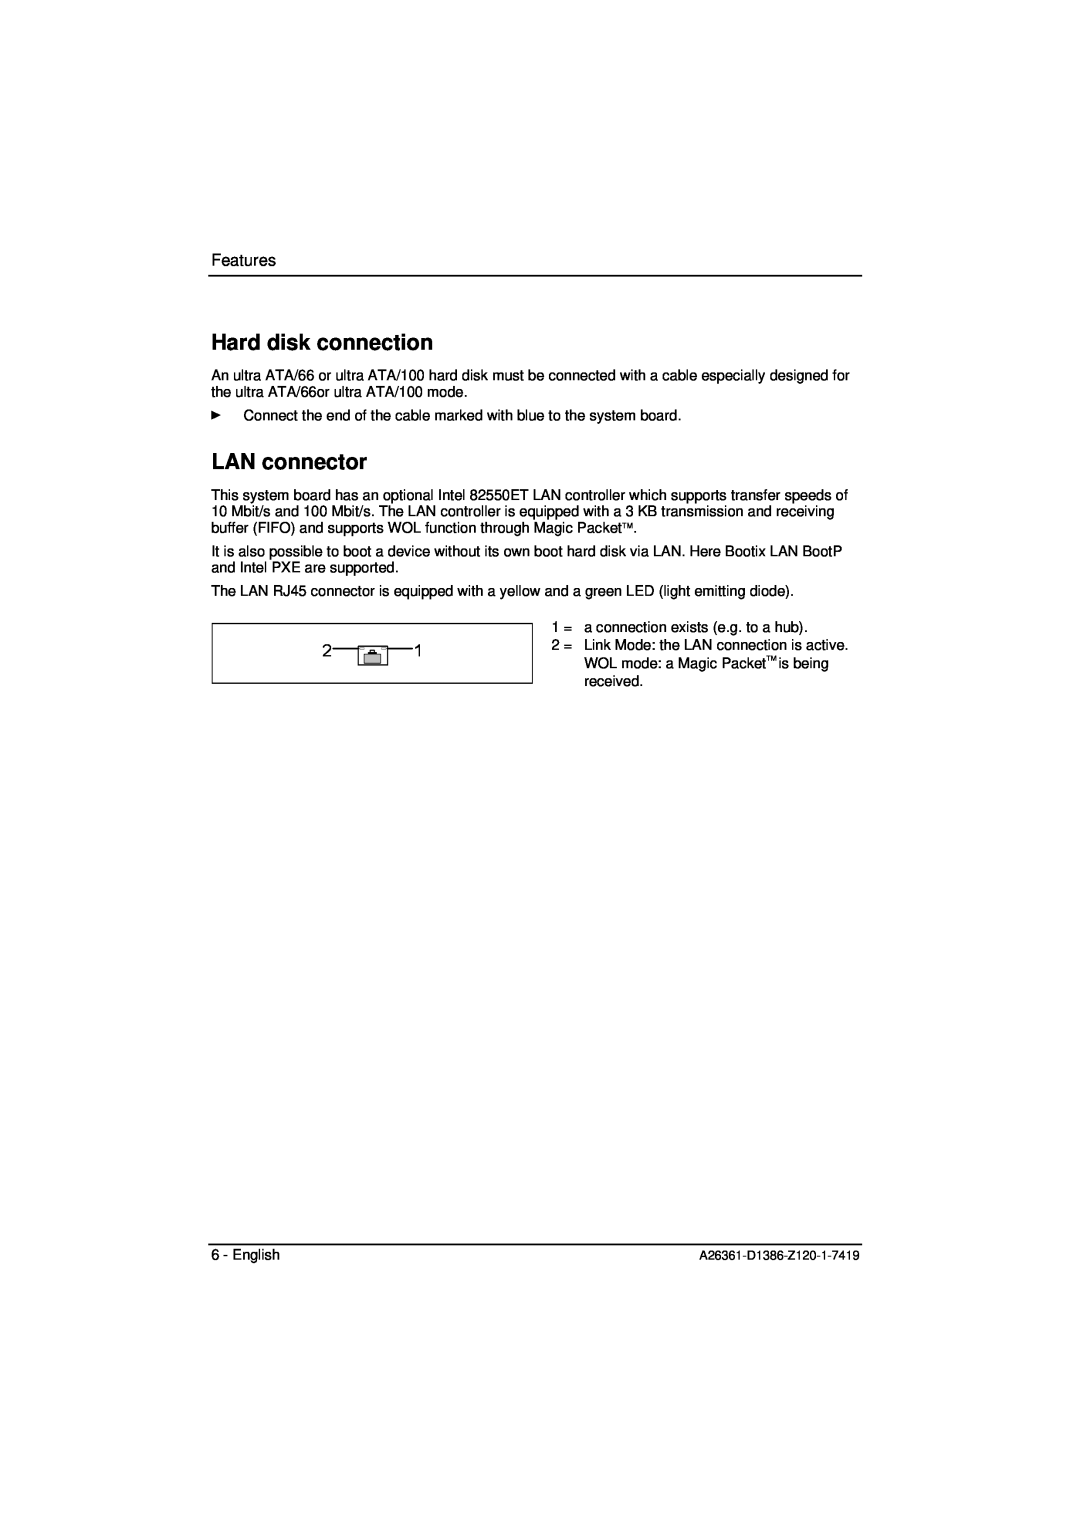 Fujitsu D1386 technical manual Hard disk connection, LAN connector, Features 